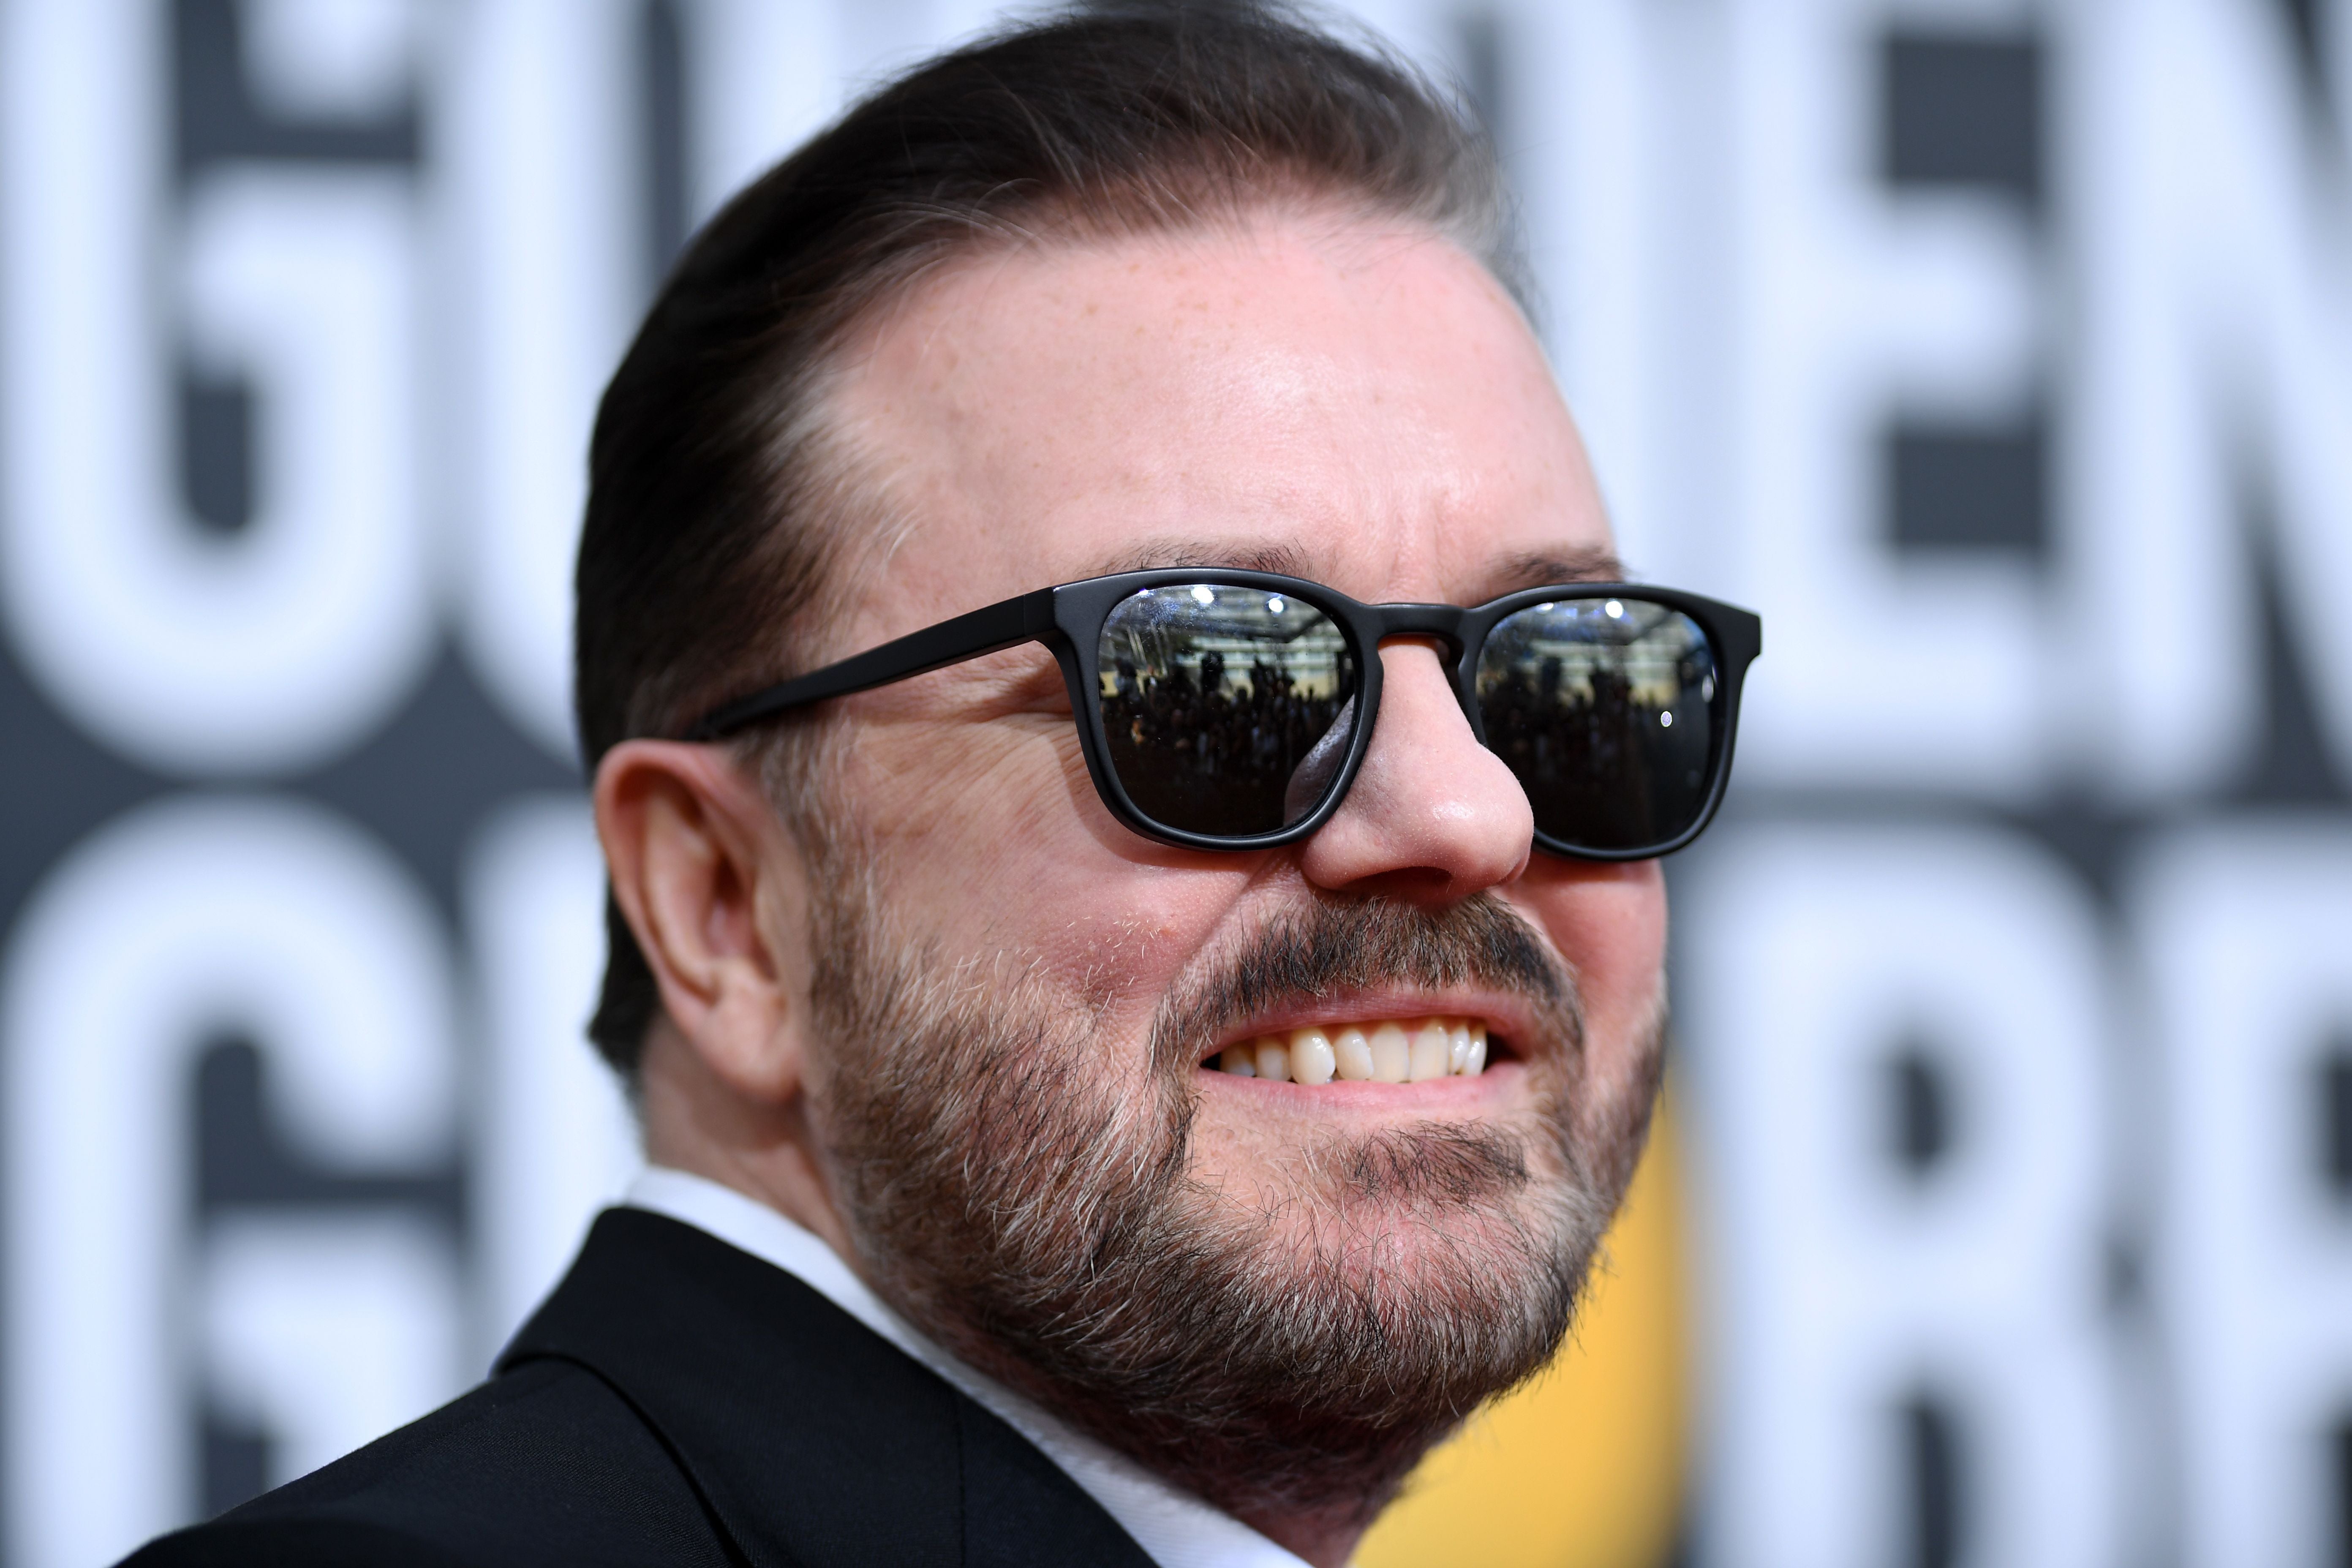 Gervais has previously faced criticism for his handling of trans issues in past specials